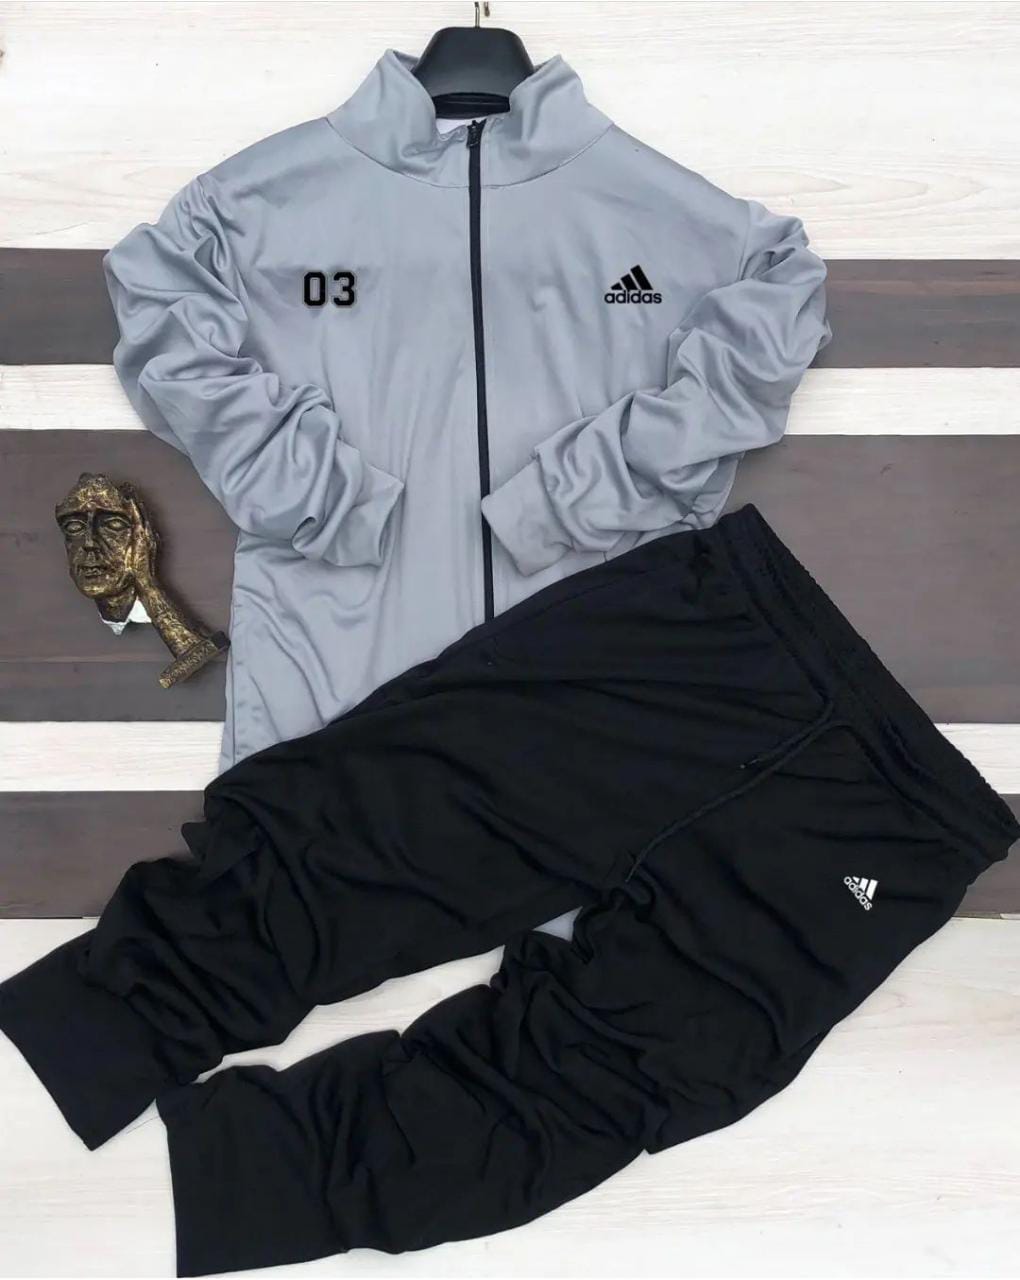 Details View - PUMA AND ADIDAS TRACK SUIT photos - reseller,reseller marketplace,advetising your products,reseller bazzar,resellerbazzar.in,india's classified site,ADIDAS TRACK SUIT | PUMA TRACK SUIT | ADIDAS TRACK SUIT in Ahmedabad | PUMA TRACK SUIT in Ahmedabad